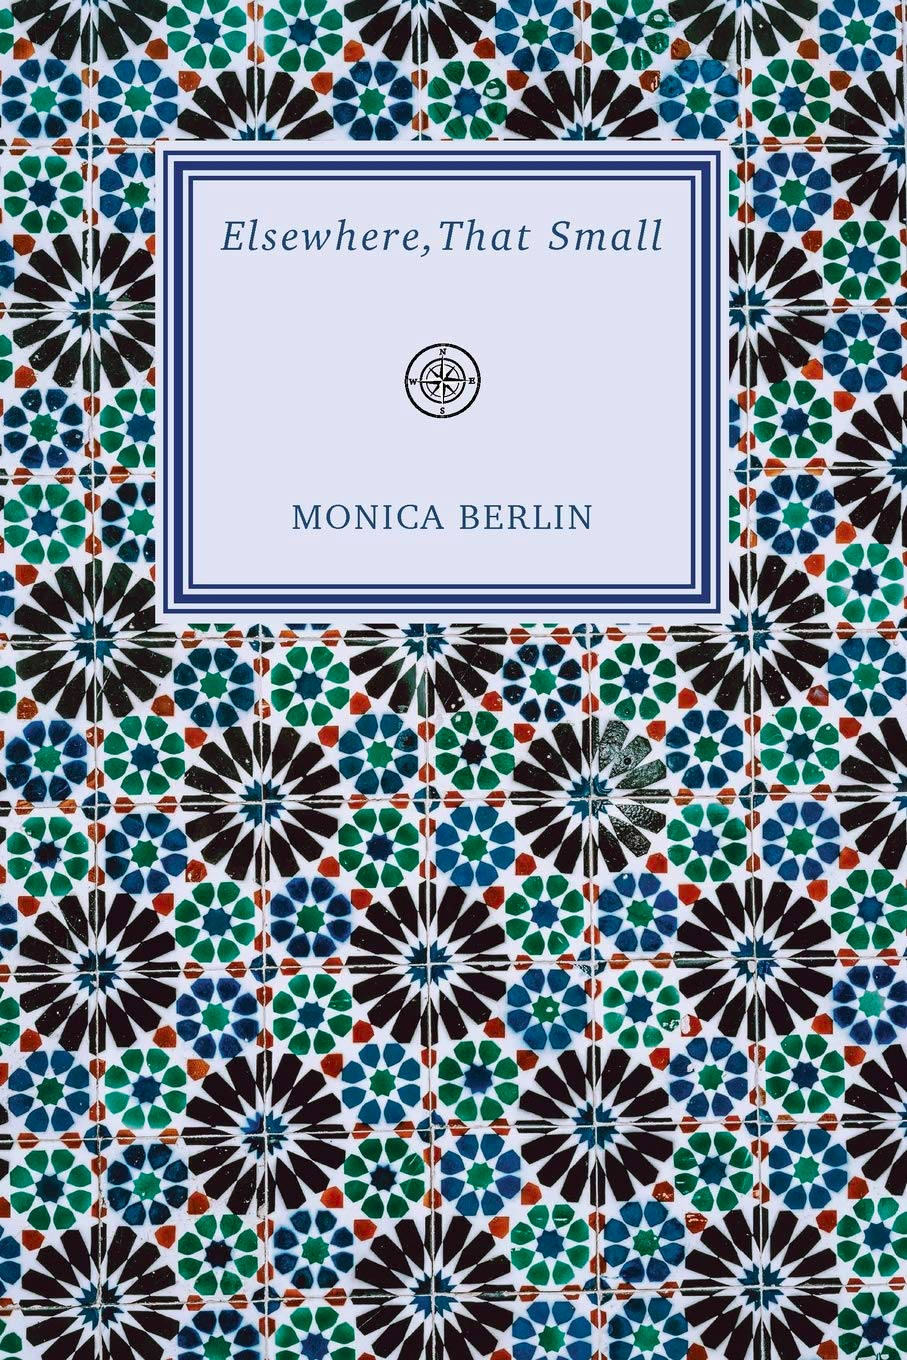 Cover of "Elsewhere, That Small" by Monica Berlin